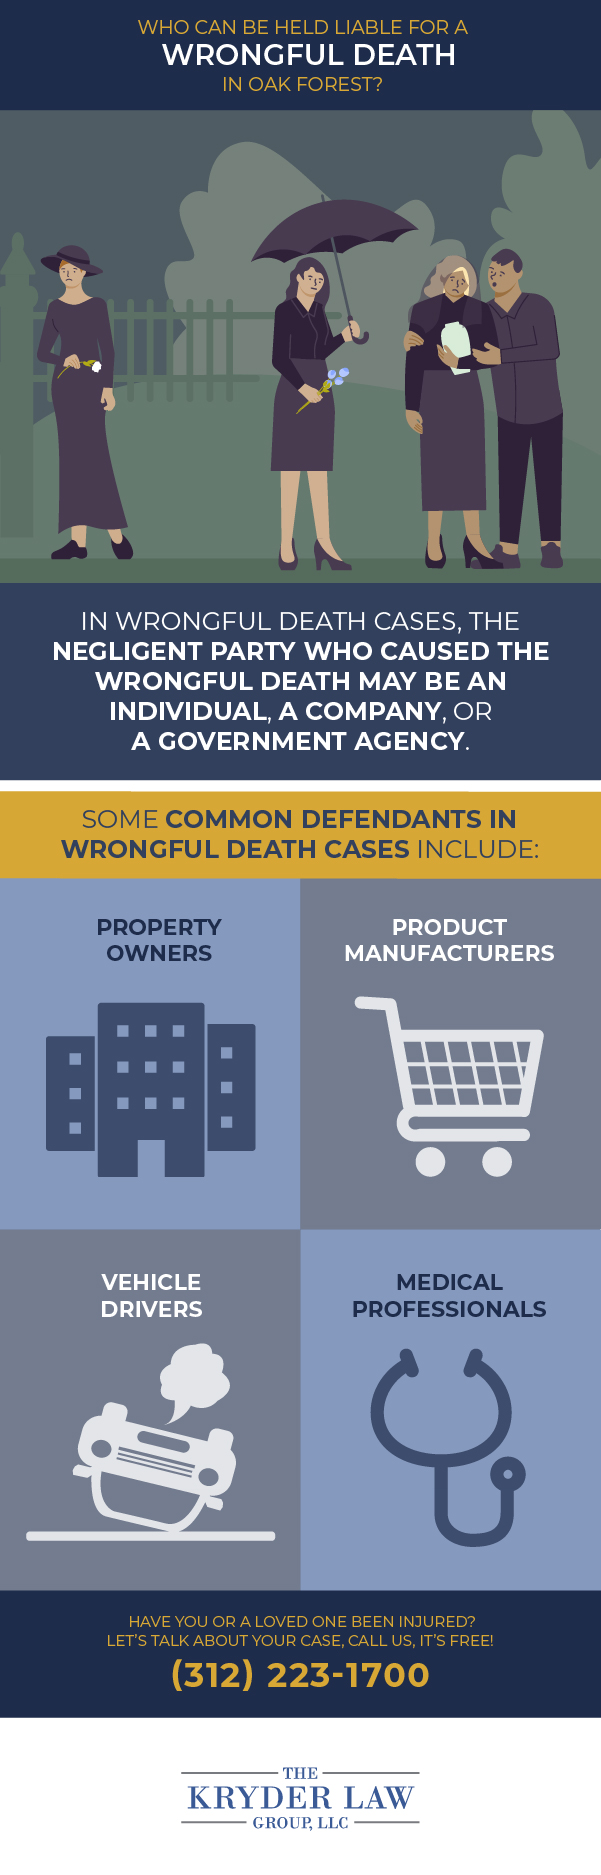 The Benefits of Hiring an Oak Forest Wrongful Death Lawyer Infographic